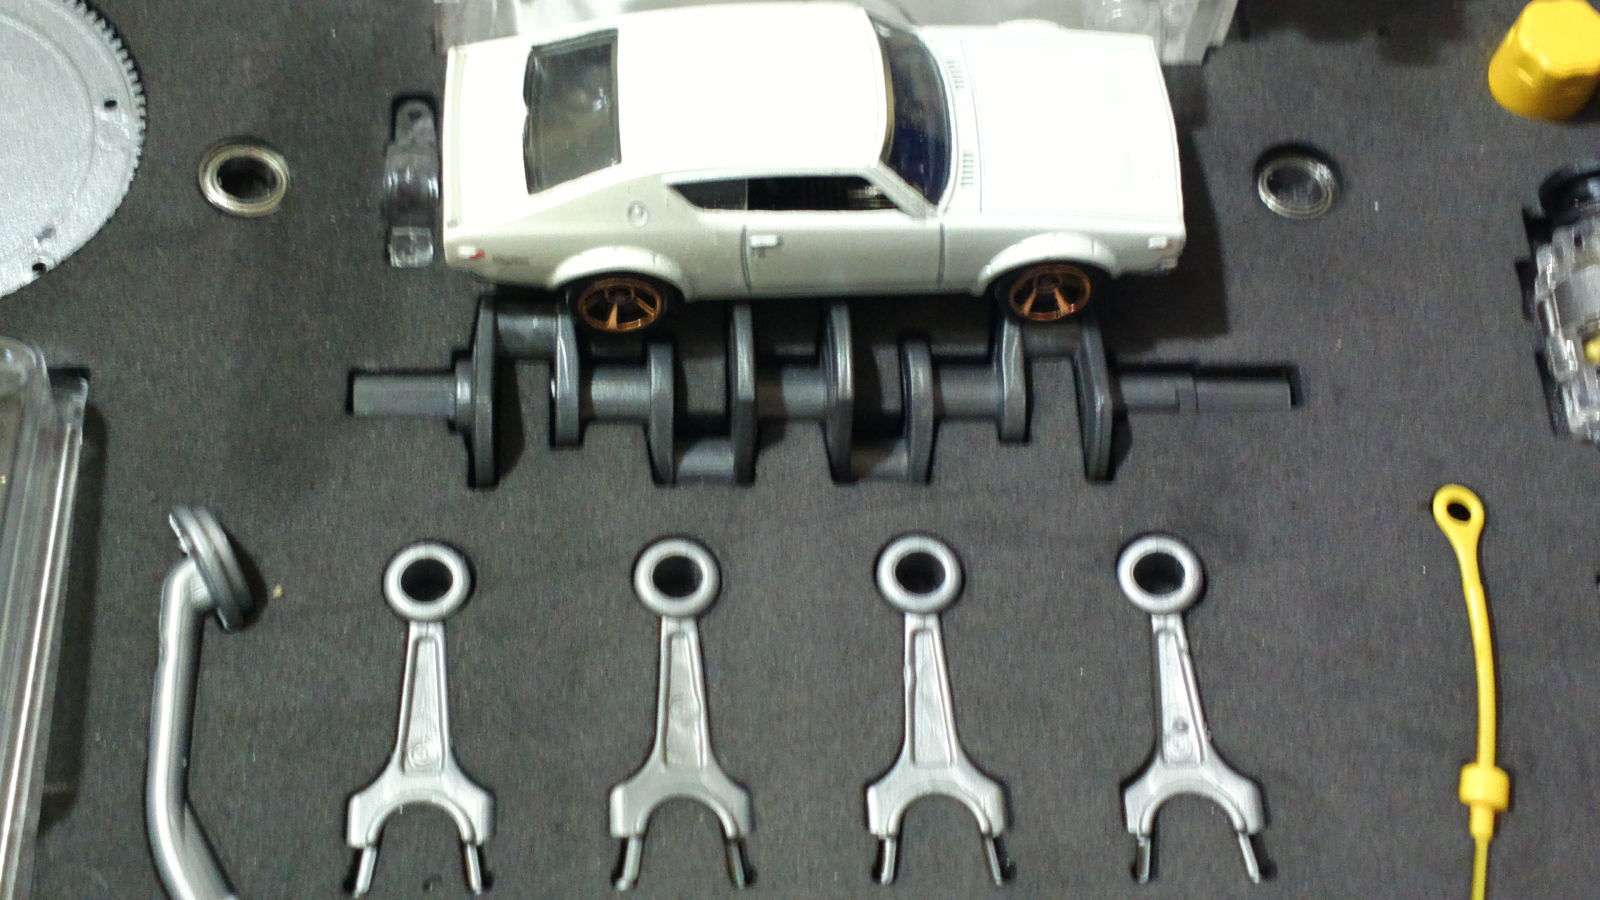 The size of the pieces compared to the Kenmeri Skyline